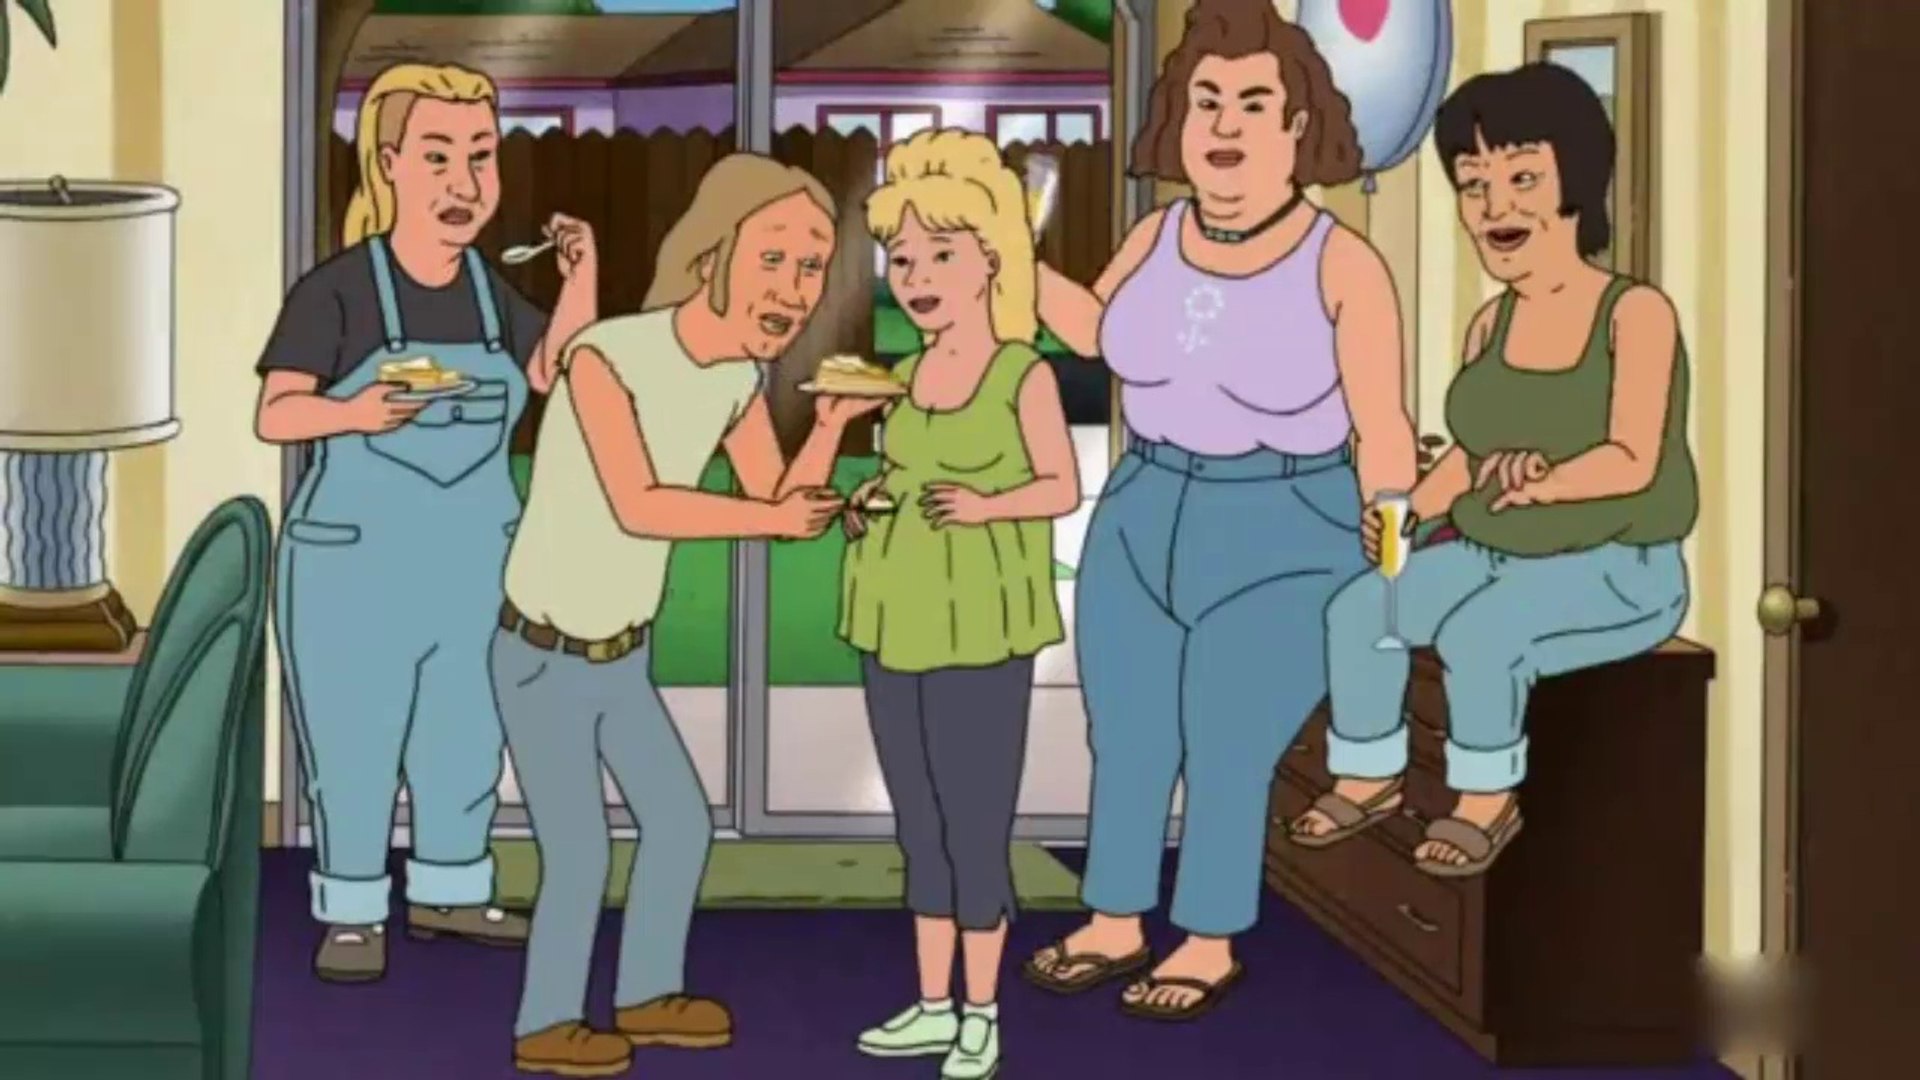 How Should King of the Hill Reboot Address Absences of Luanne, Lucky